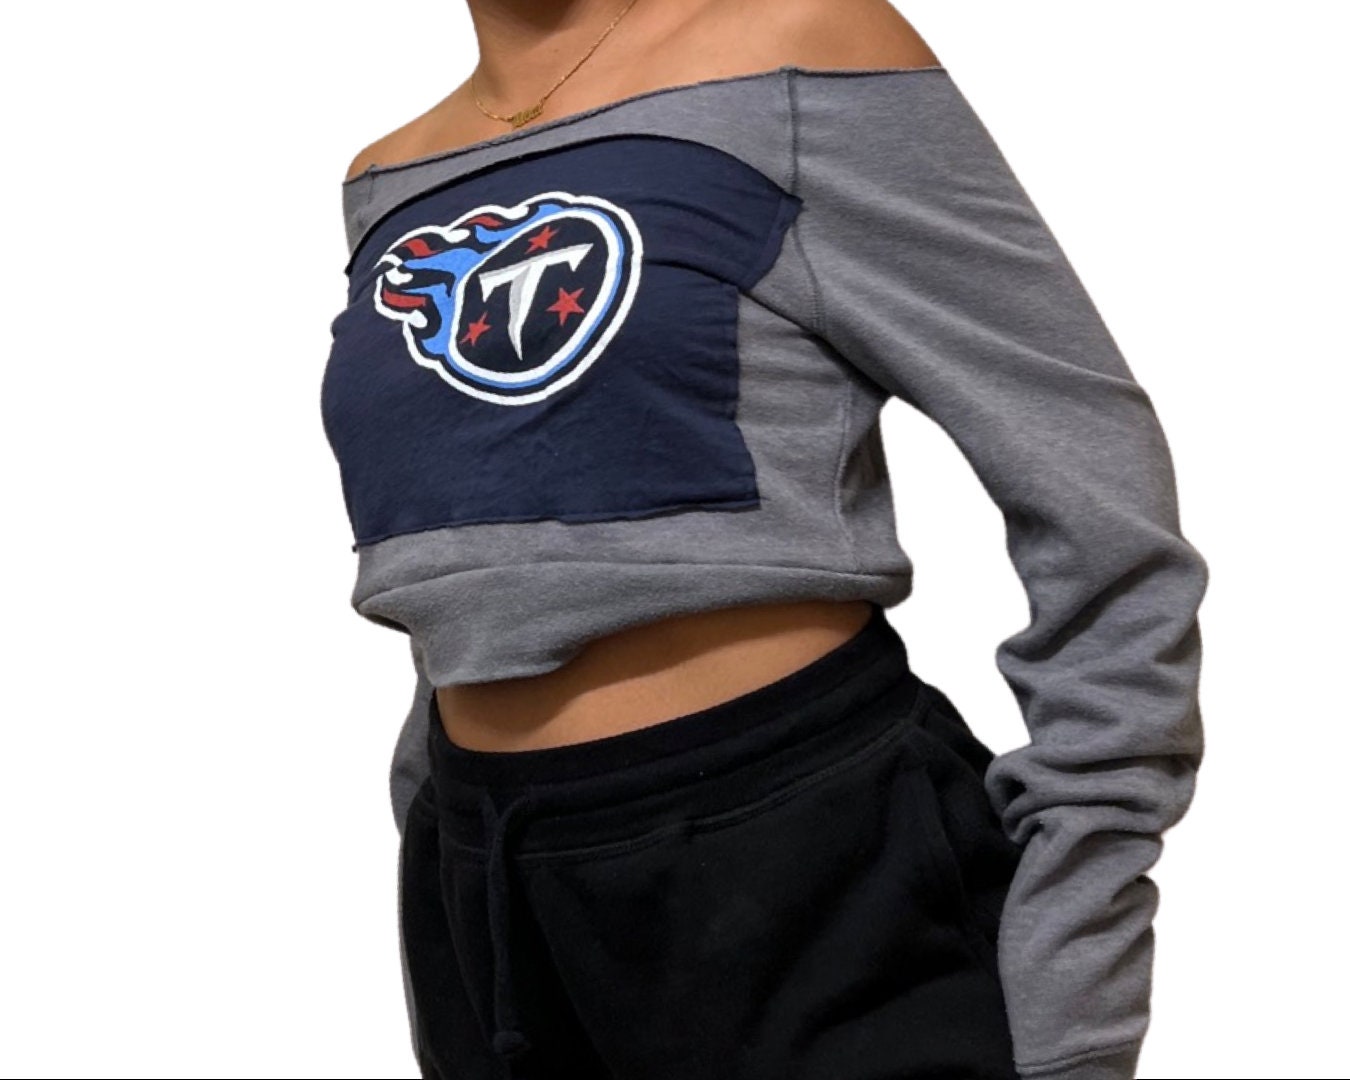 tennessee titans crop top